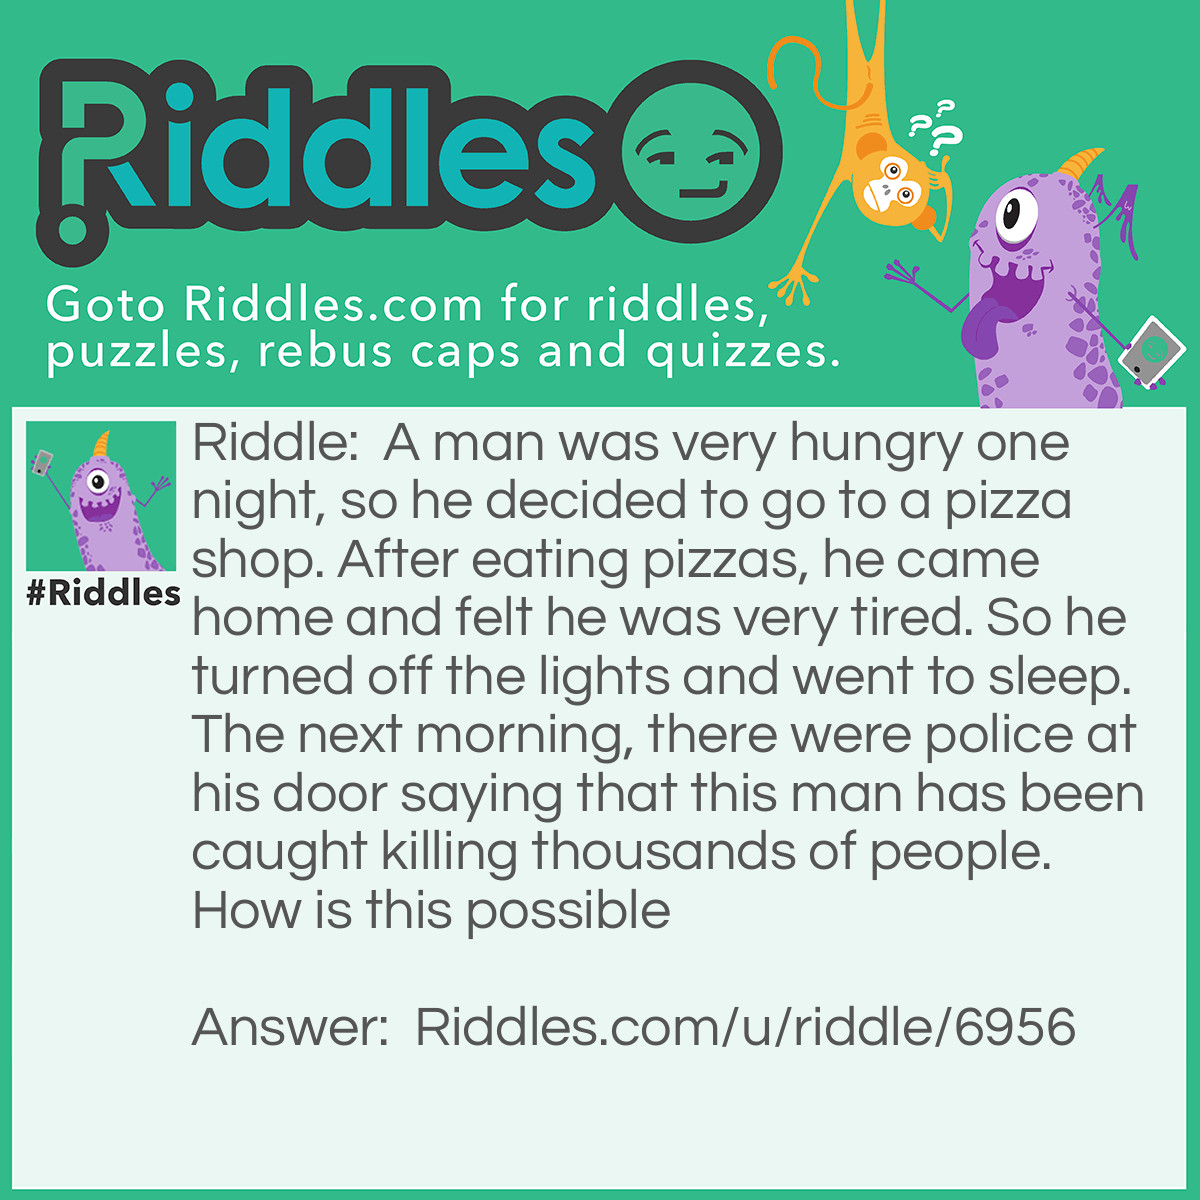 Riddle: A man was very hungry one night, so he decided to go to a pizza shop. After eating pizzas, he came home and felt he was very tired. So he turned off the lights and went to sleep. The next morning, there were police at his door saying that this man has been caught killing thousands of people. How is this possible Answer: He lives in a lighthouse, so when he turns off the lights, the ships can't see!